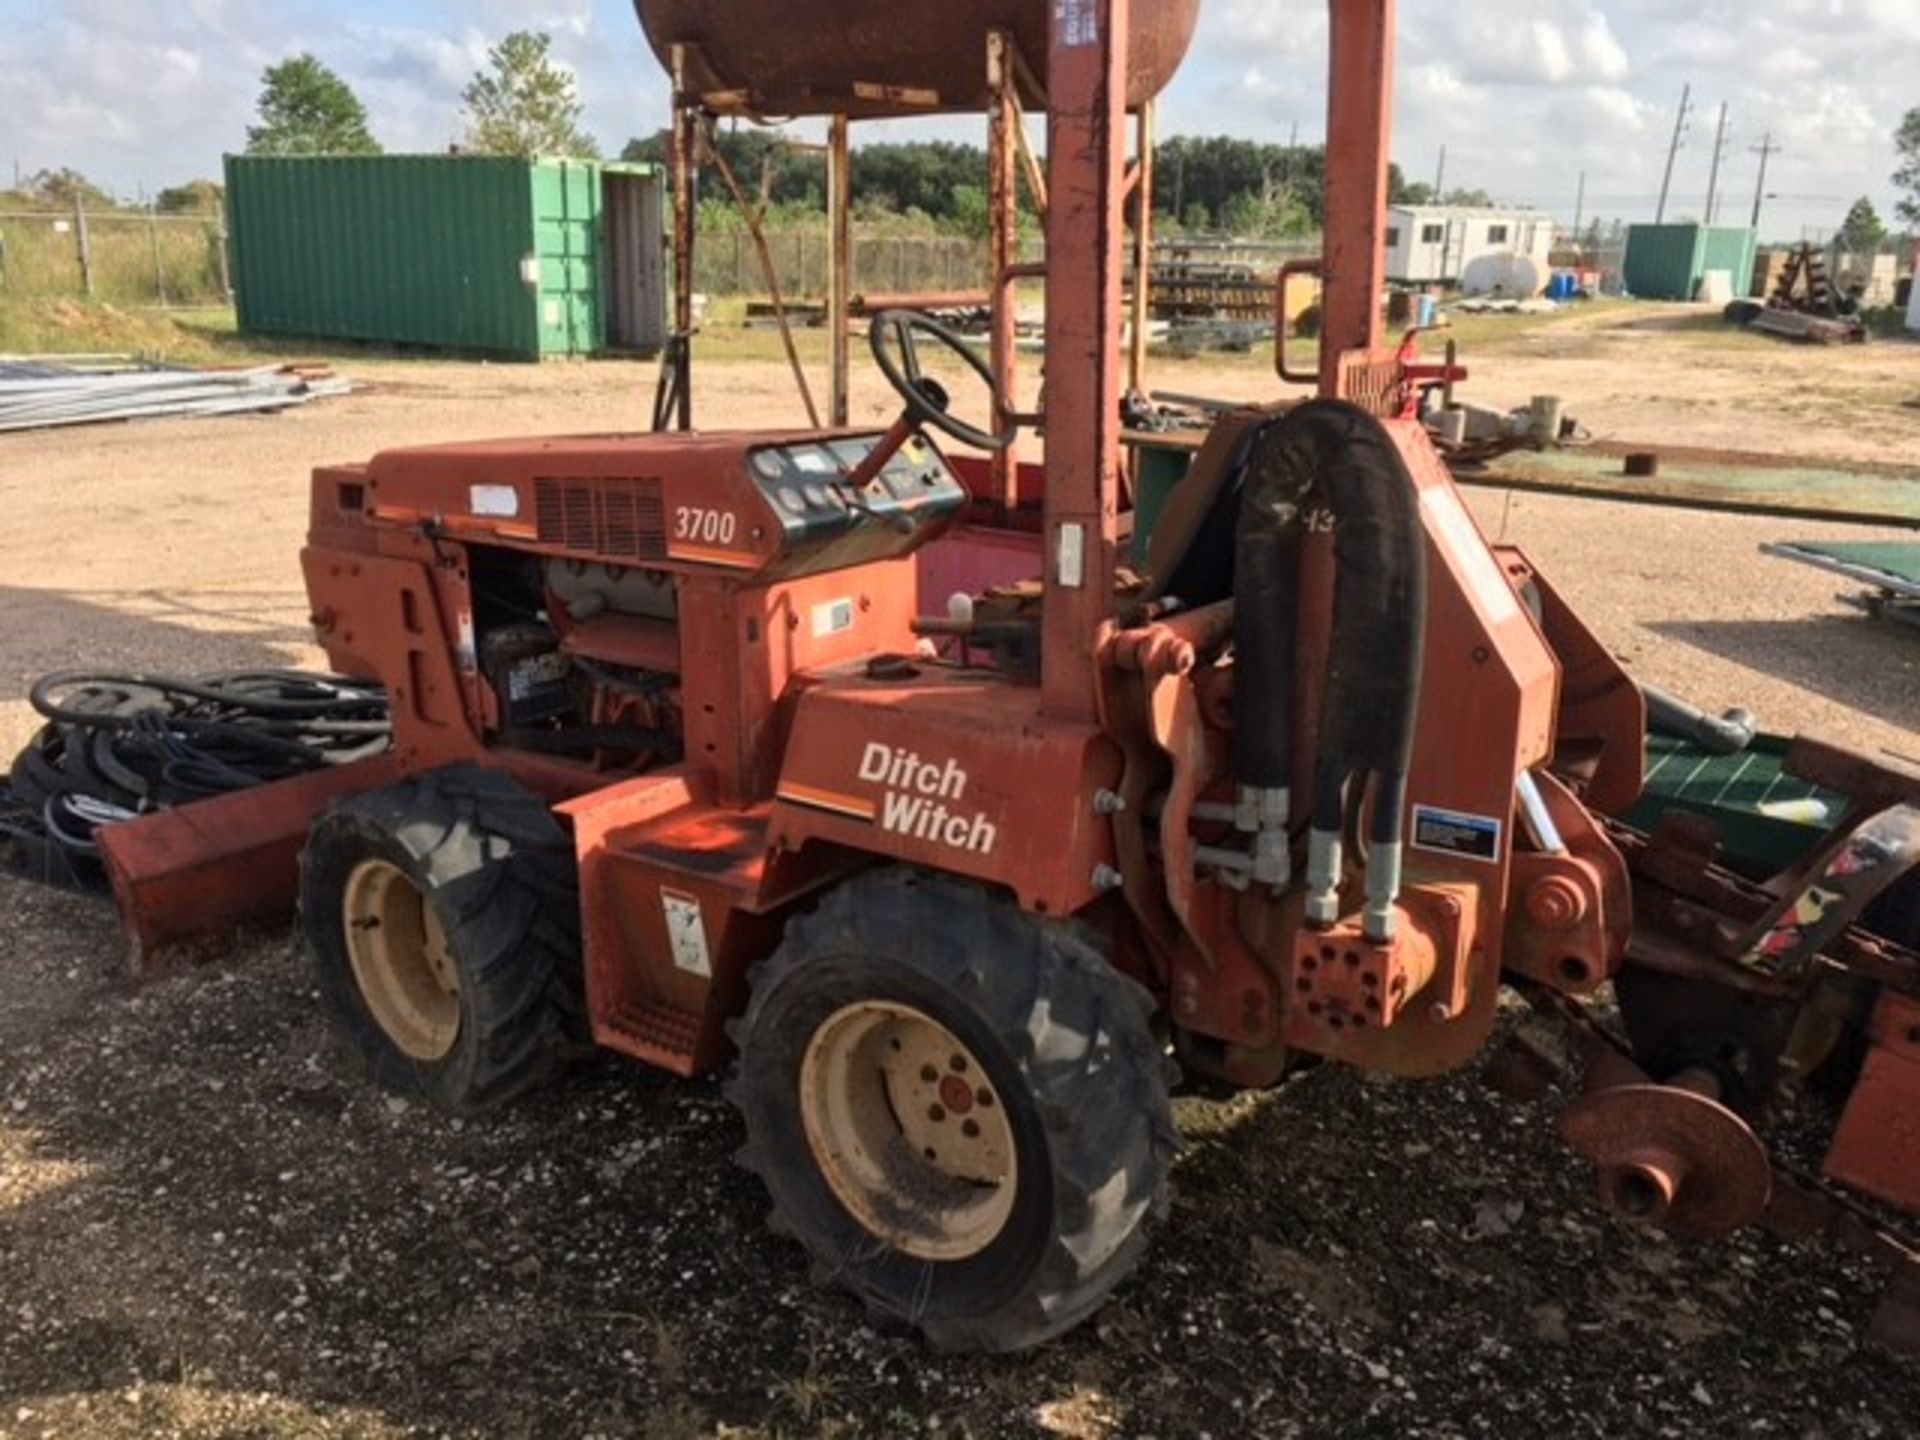 DITCH WITCH 3700D RIDE ON TRENCHER